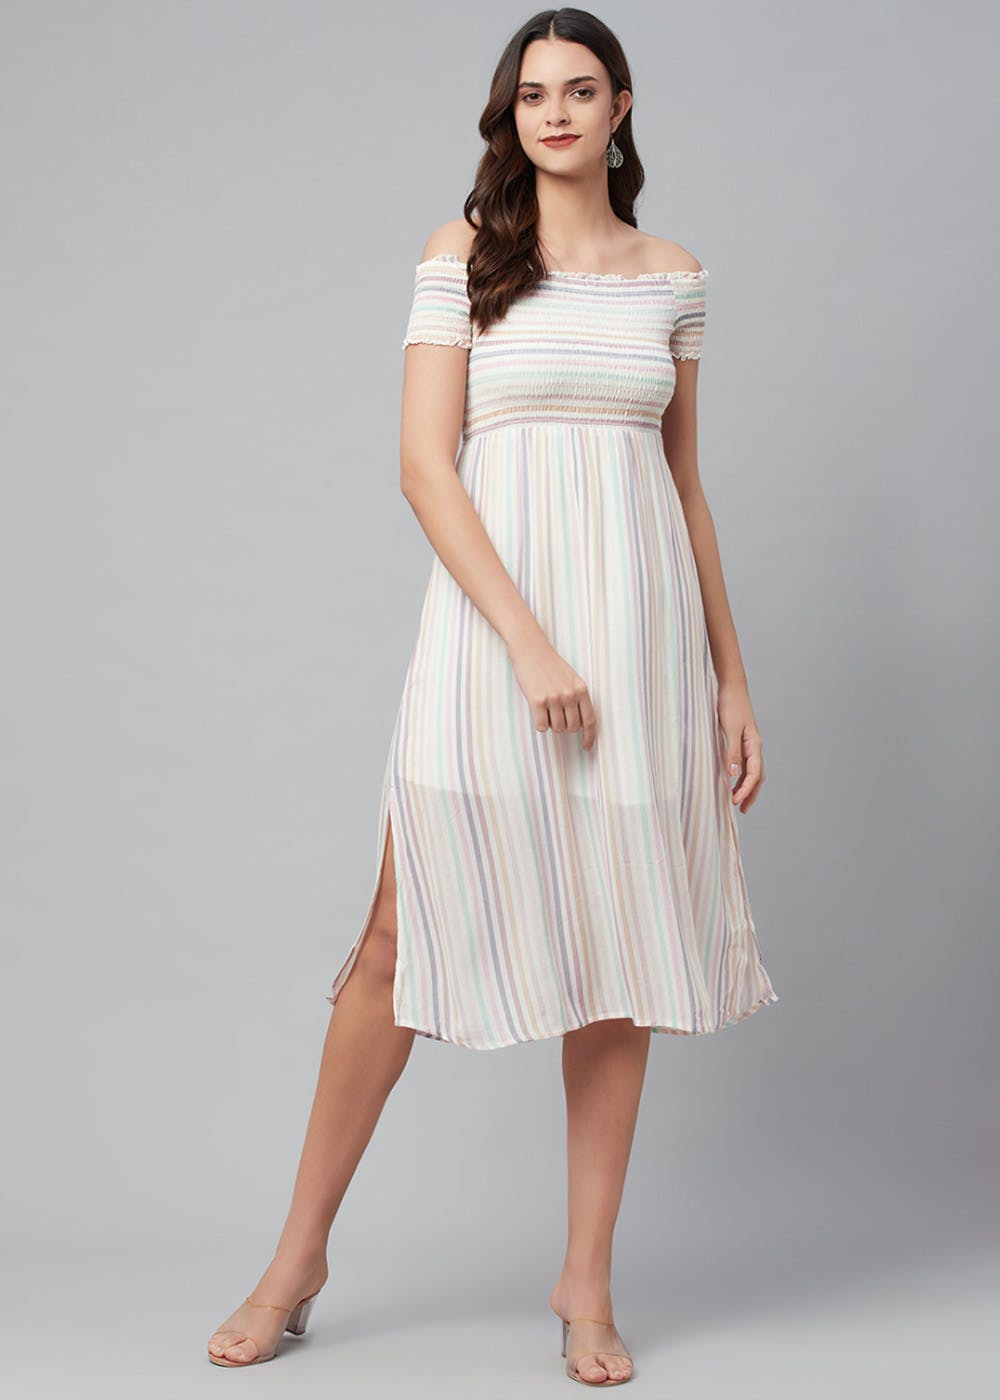 MARQUEE Off-White Sequin Off-Shoulder Dress